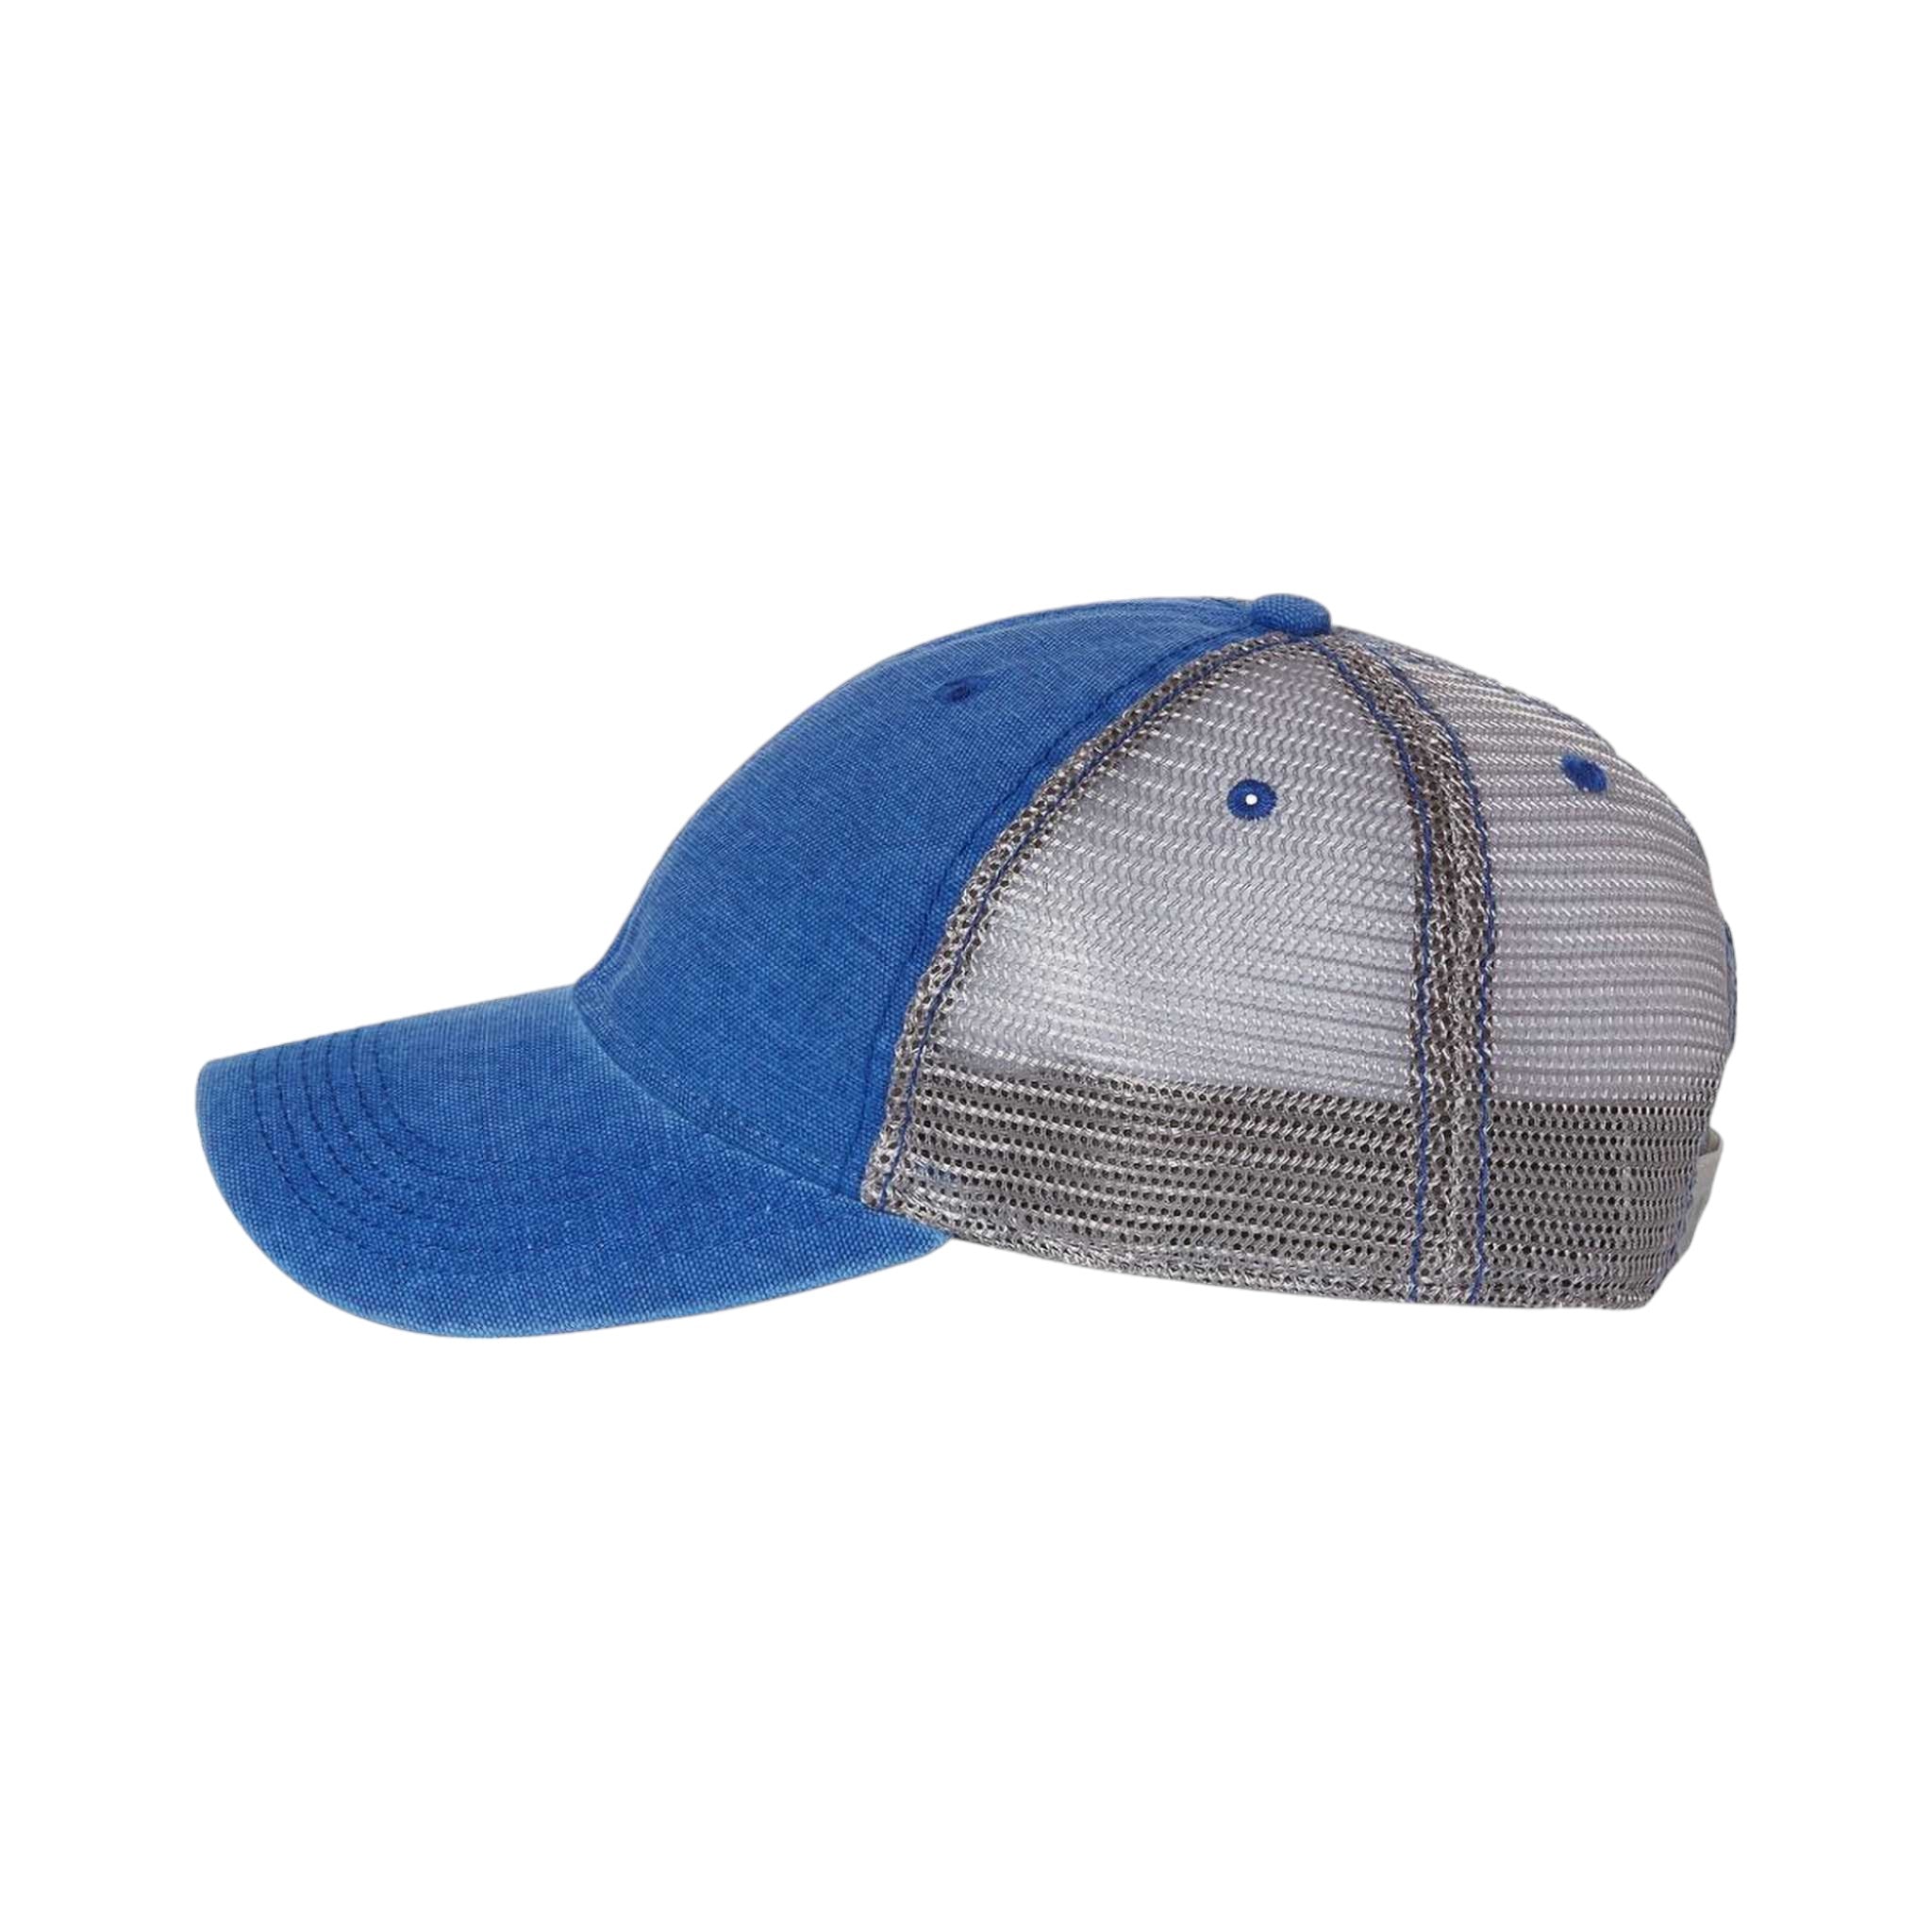 Side view of LEGACY DTA custom hat in royal and grey